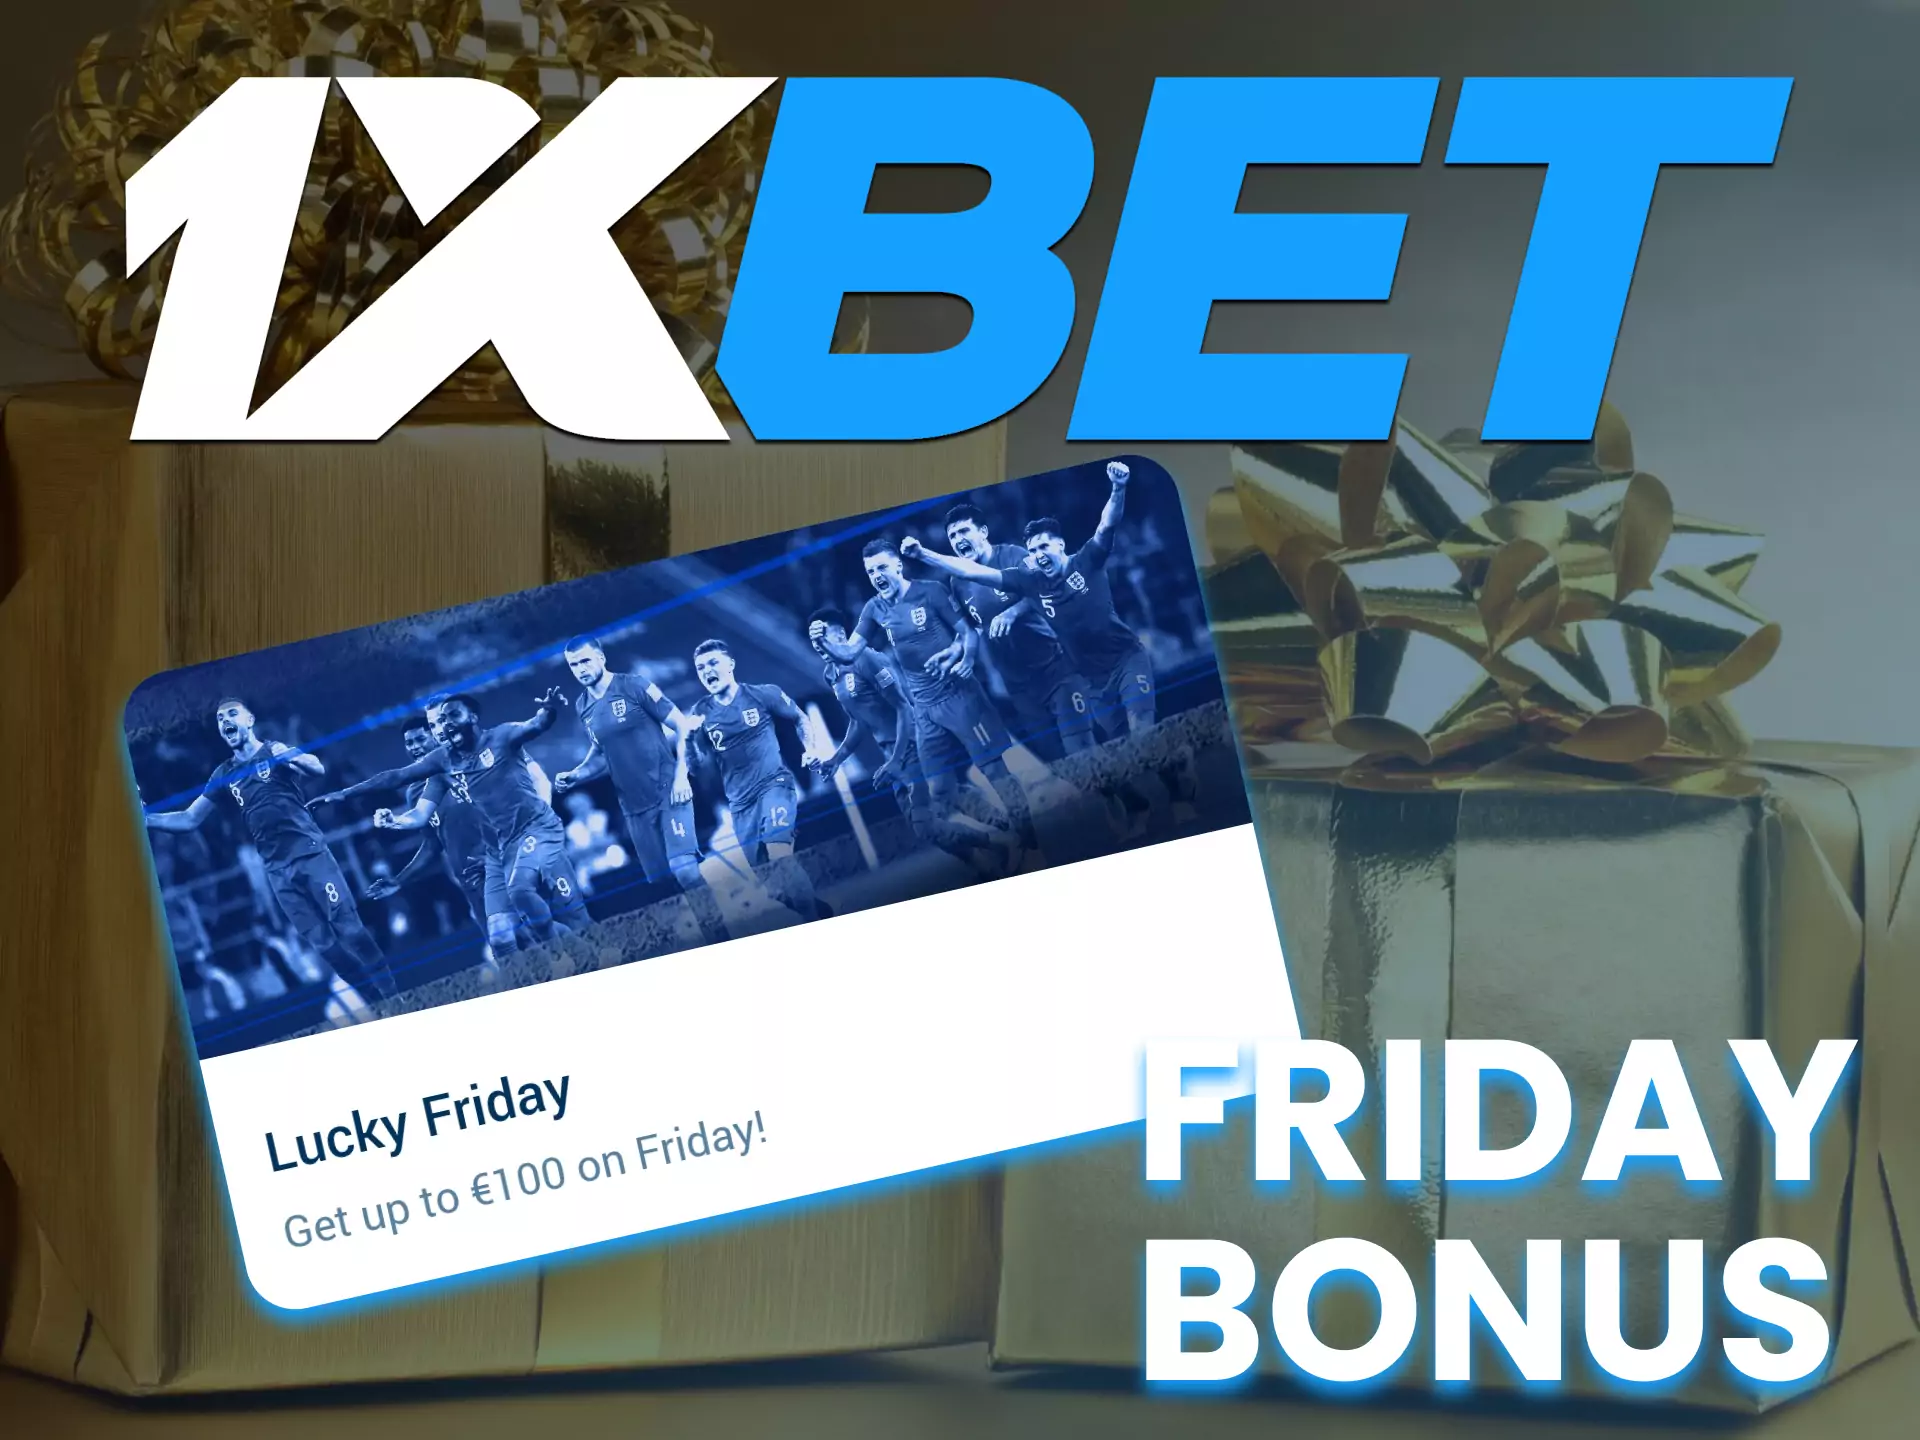 At 1xBet, don't forget to get your special Friday bonus.